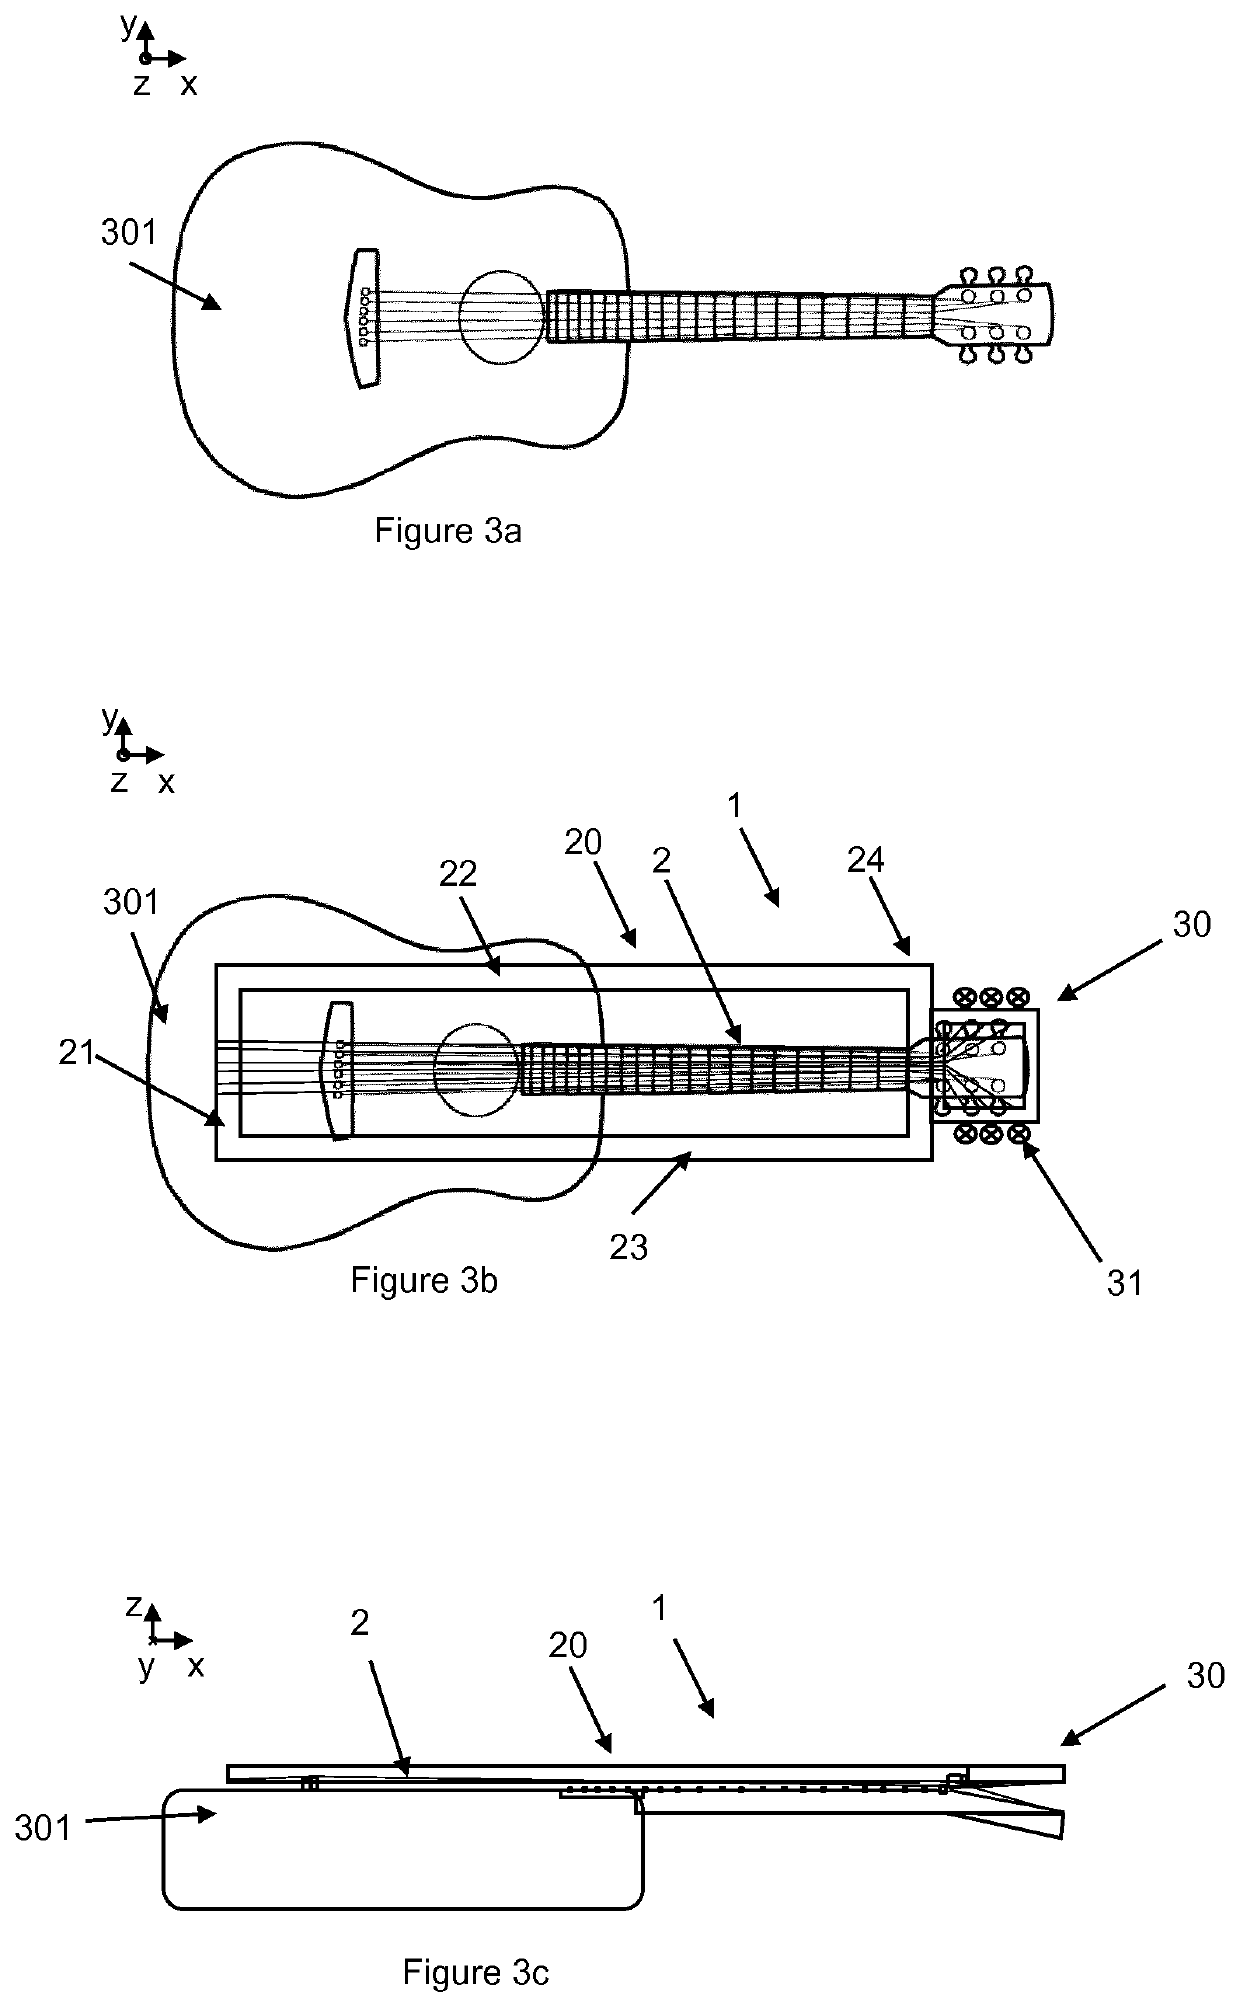 Converter arrangement and a method for increasing the number of strings on a string instrument